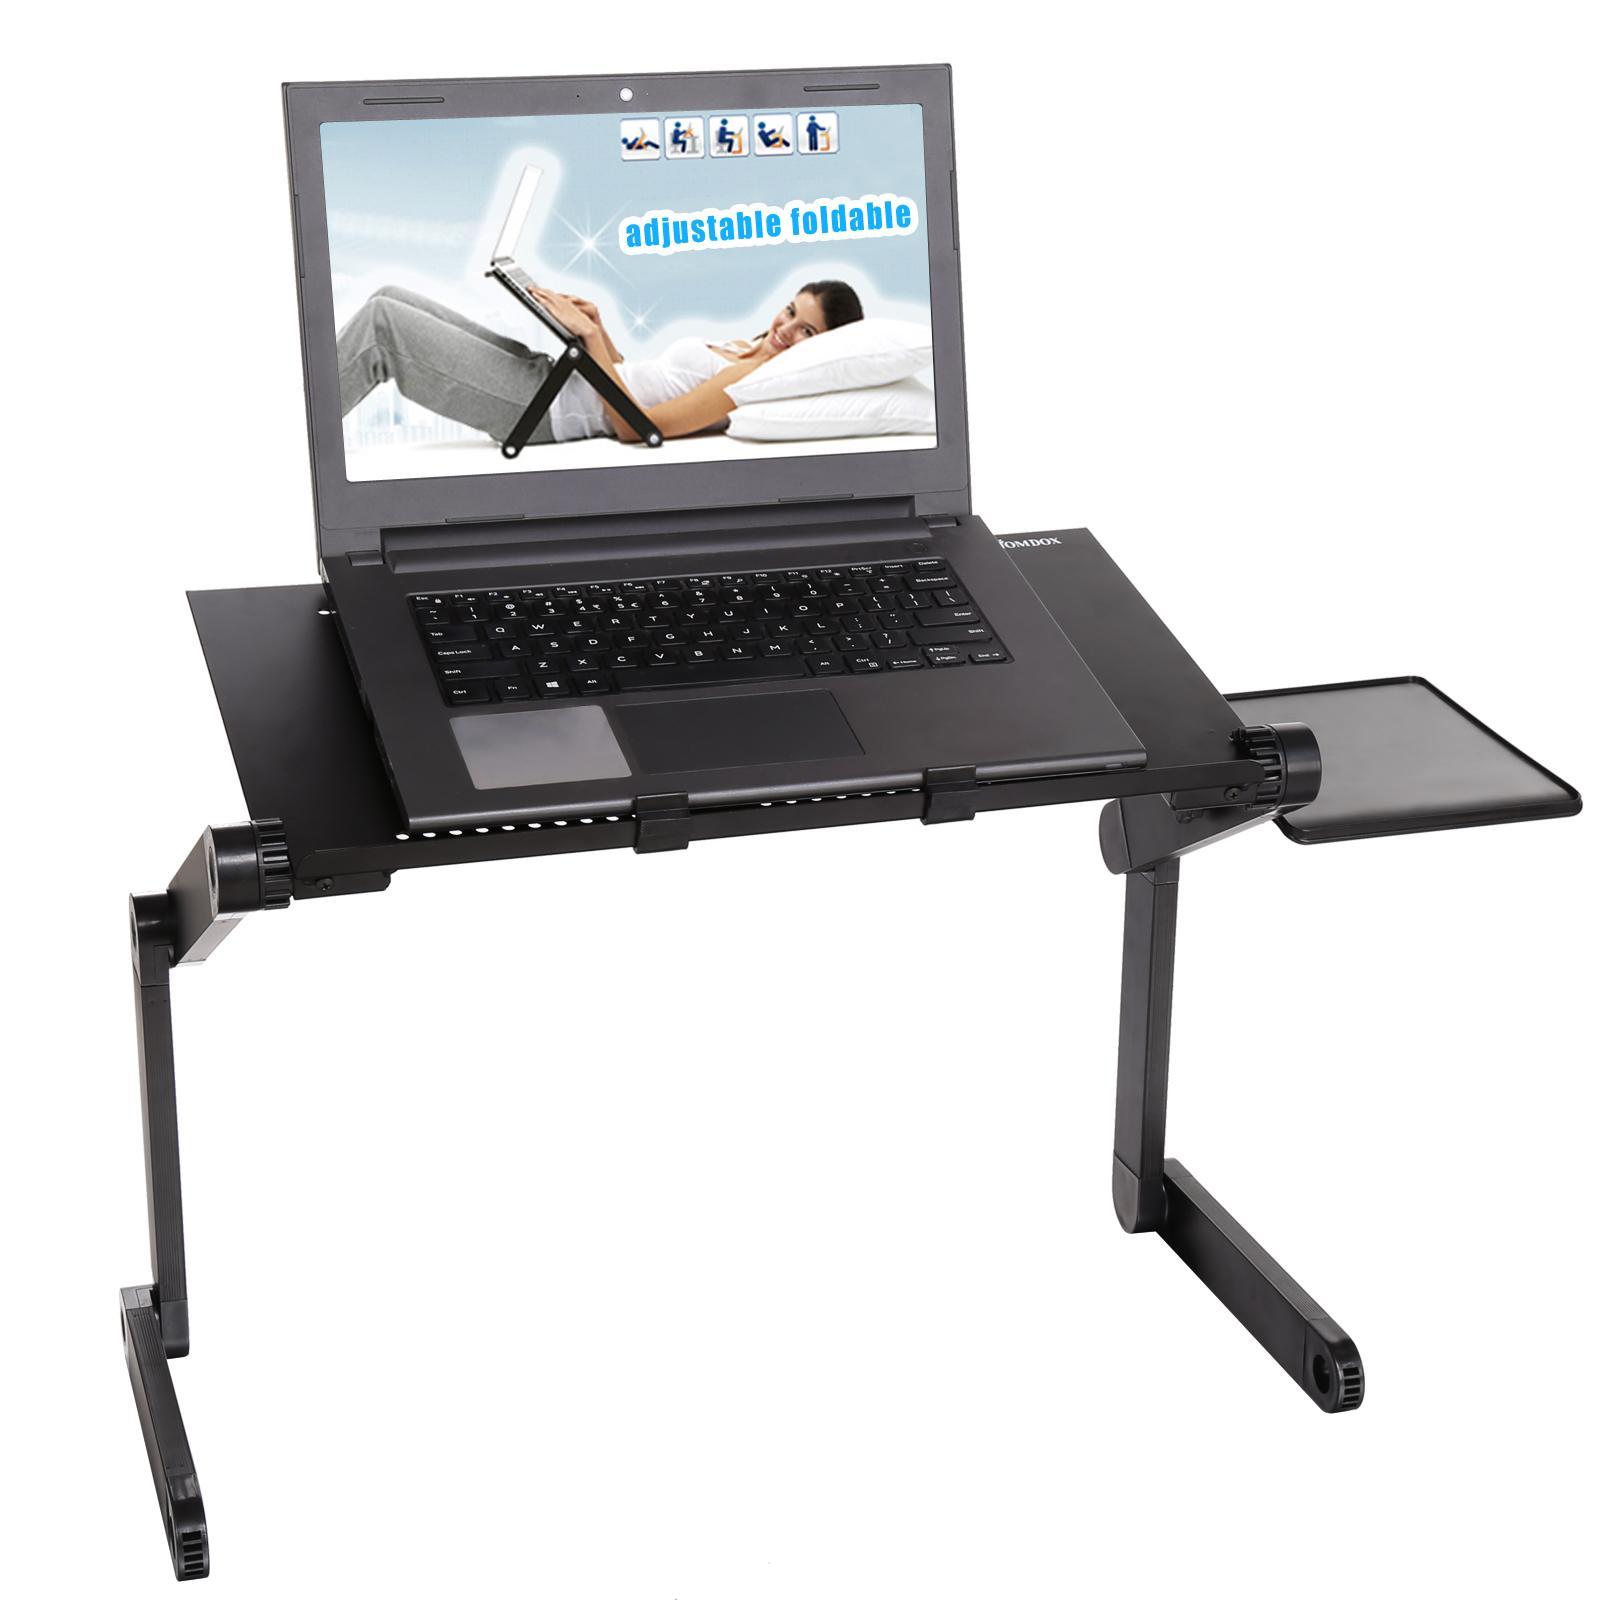 Homdox Black 360 Degree Adjustable Protable Laptop Stand Desk table for bed - image 2 of 7